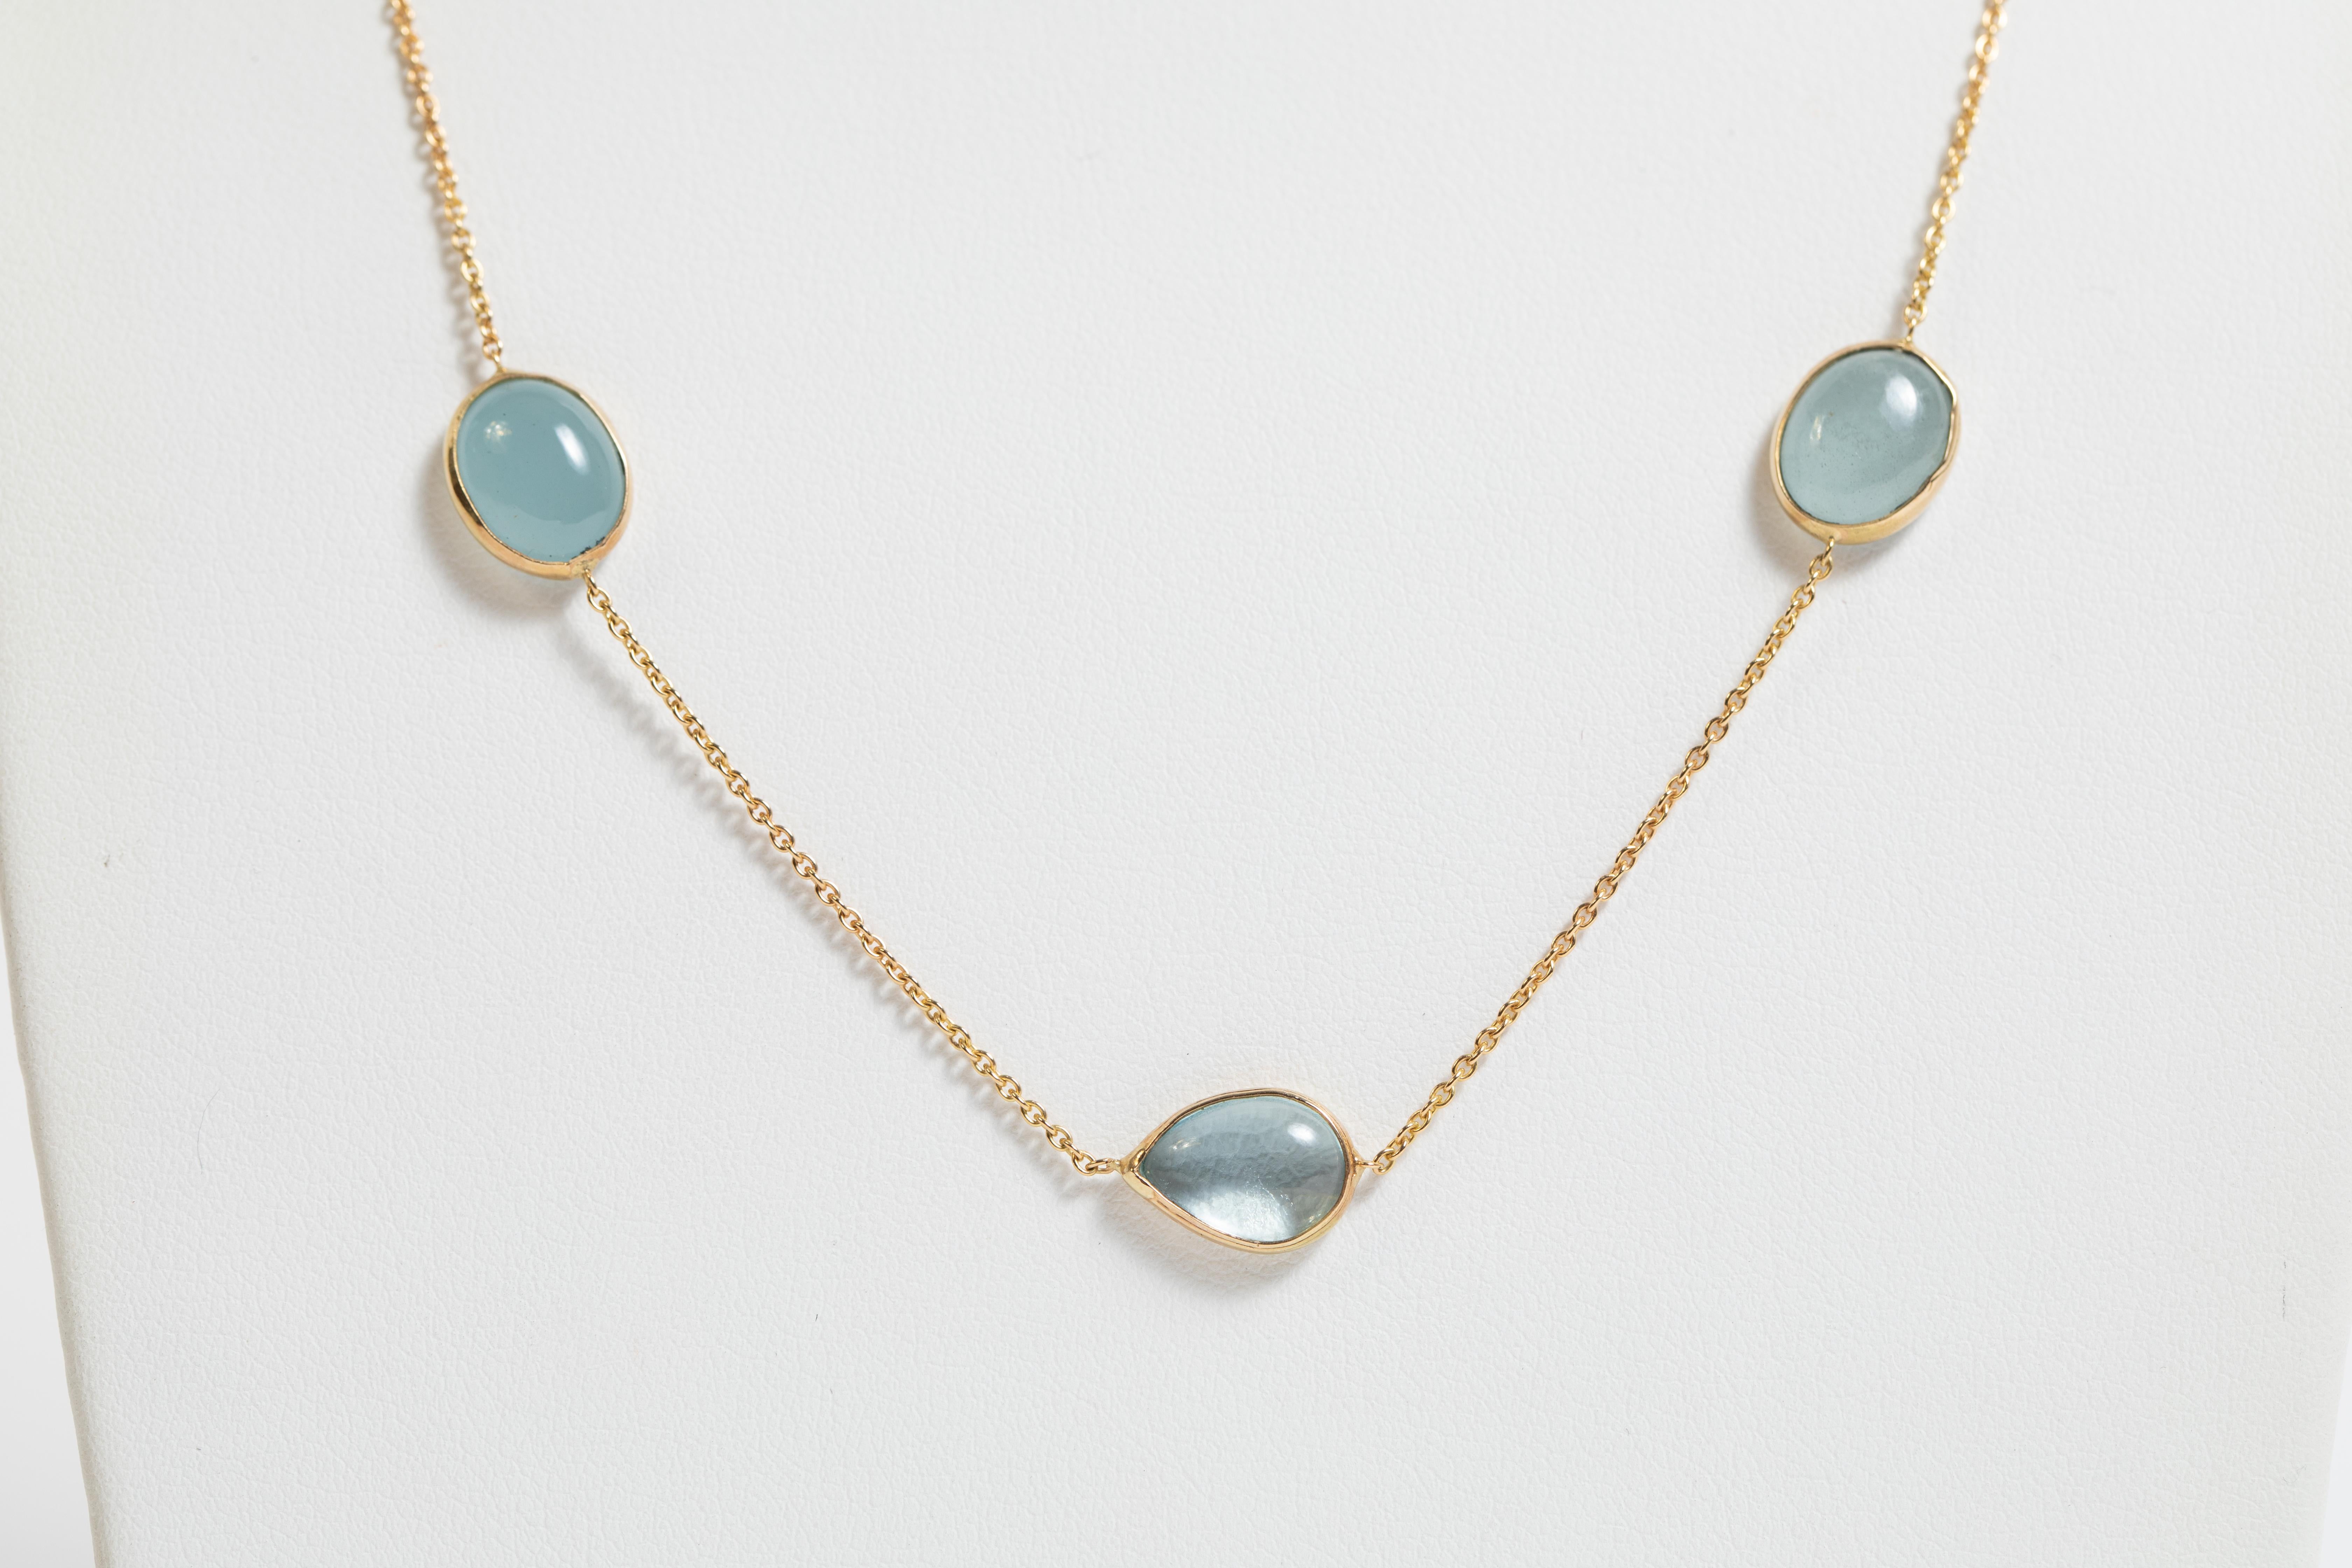 A charming necklace with a luminous cameo of aquamarine cabochons.
18k yellow gold, 
Necklace total length 42,5 cm 
Aquamarine cabochons weight: 12,97 carats
Necklace total weight : 6,09 g
Can be ajusted
French assay mark.